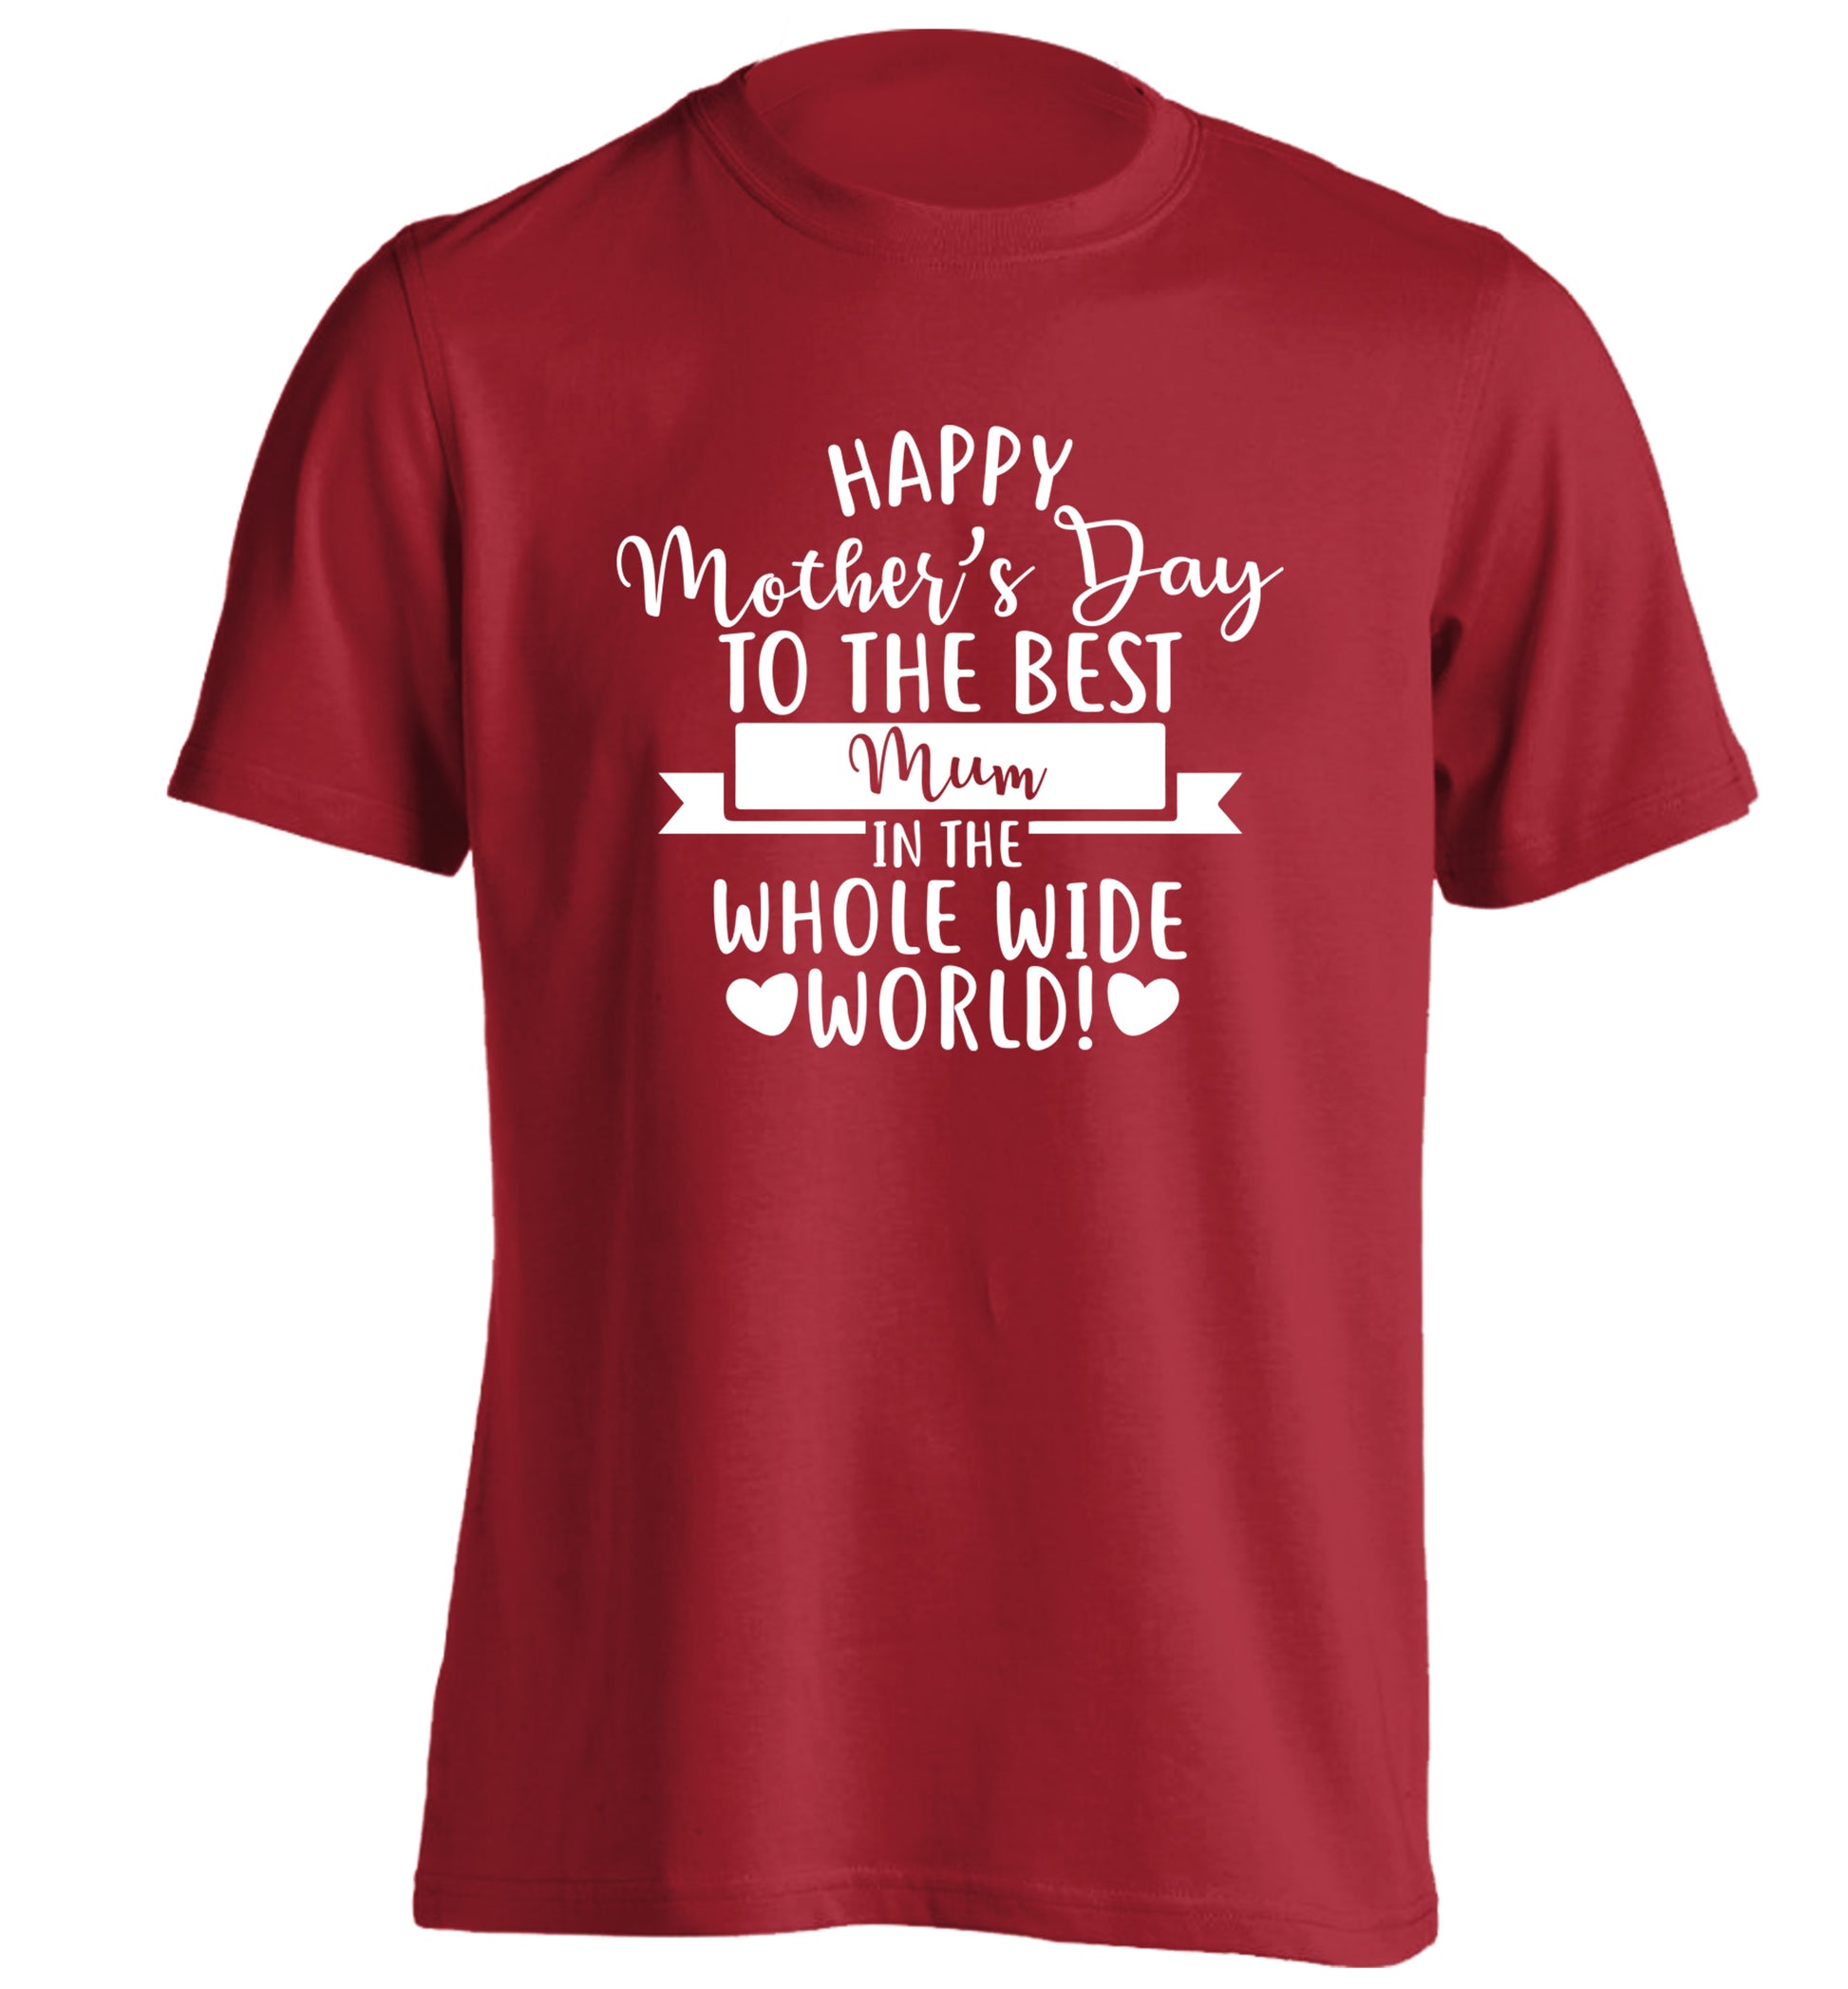 Happy Mother's Day to the best mum in the whole wide world! adults unisex red Tshirt 2XL